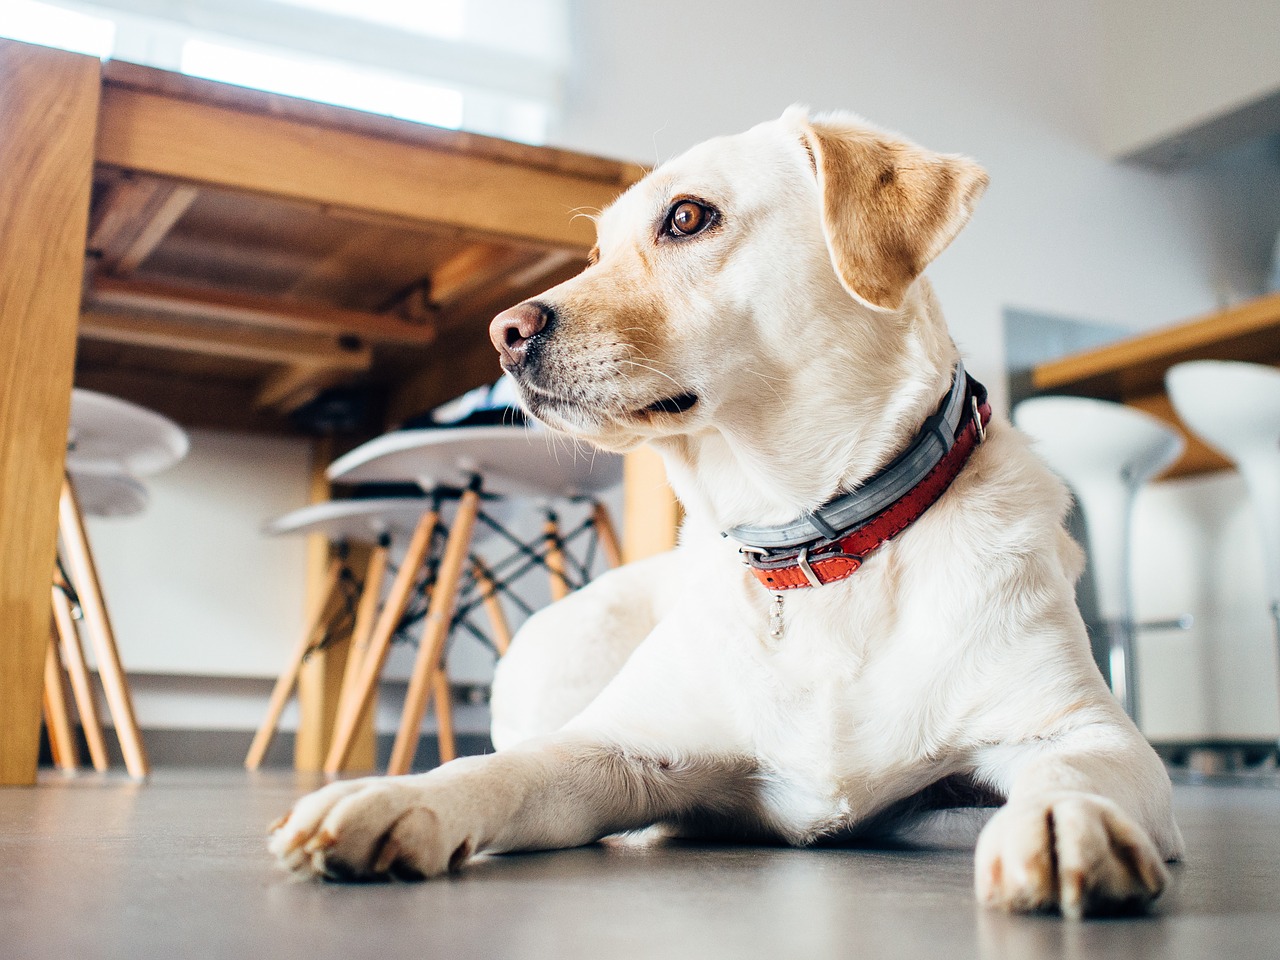 The pet friendly workplace trend is growing as companies realize this brings more motivation, happiness, and well-being to their employees.